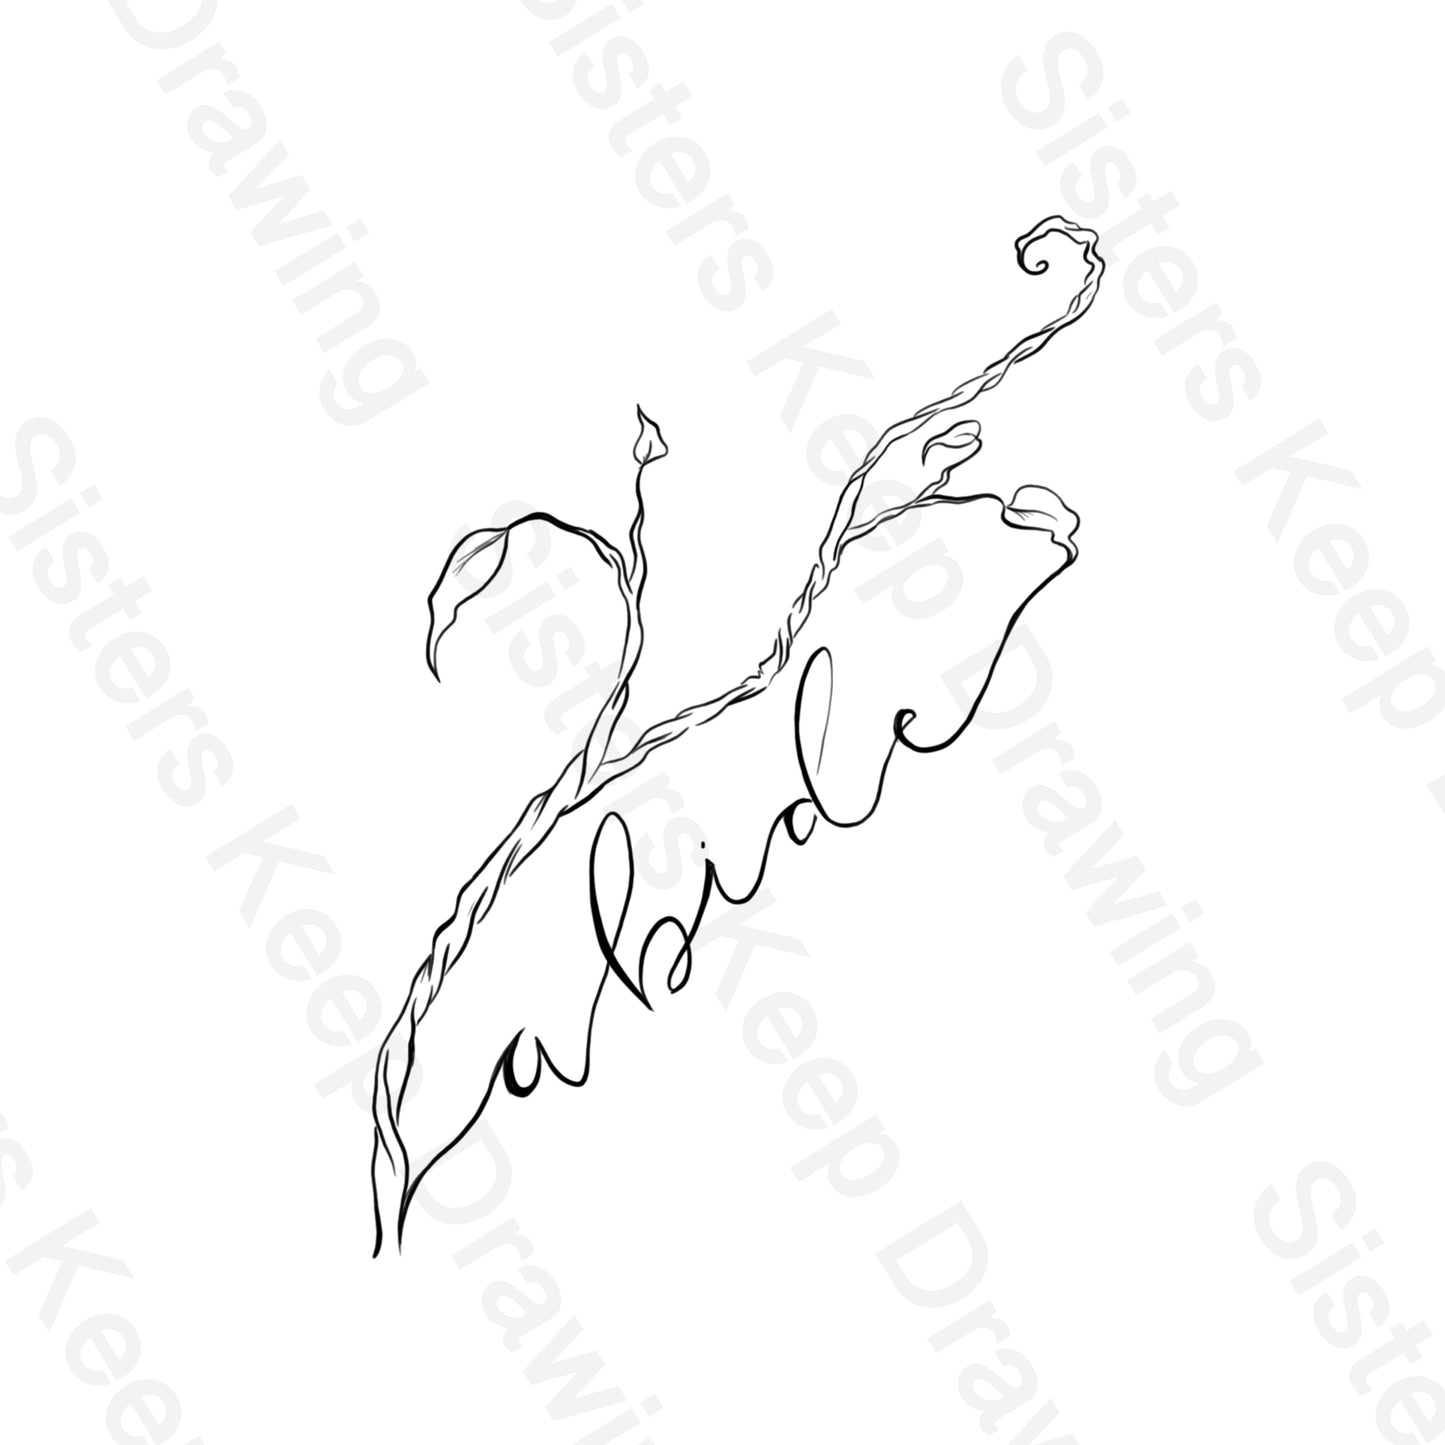 The Vine / Abide - Bible Inspired - Tattoo Transparent PNG